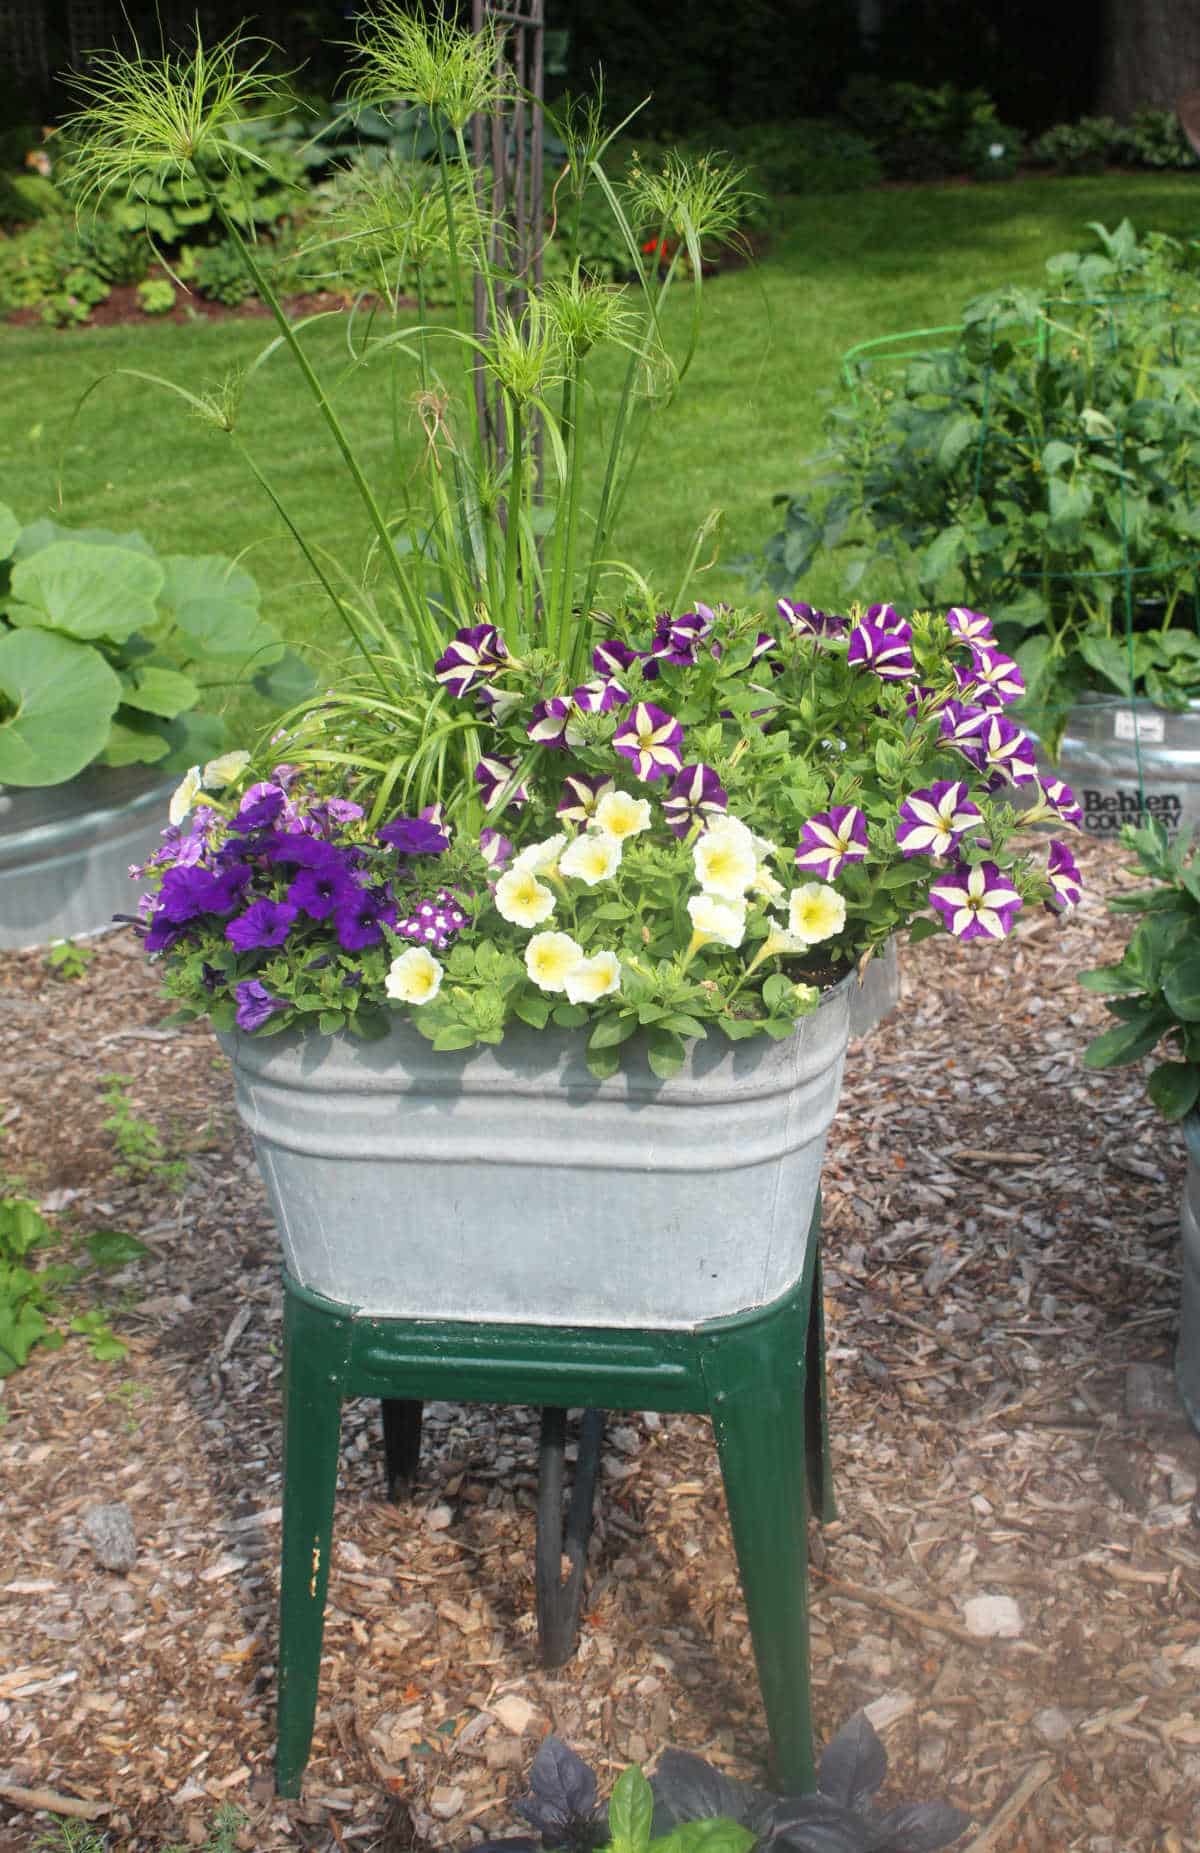 Old laundry tub filled with purple and yellow petunias.